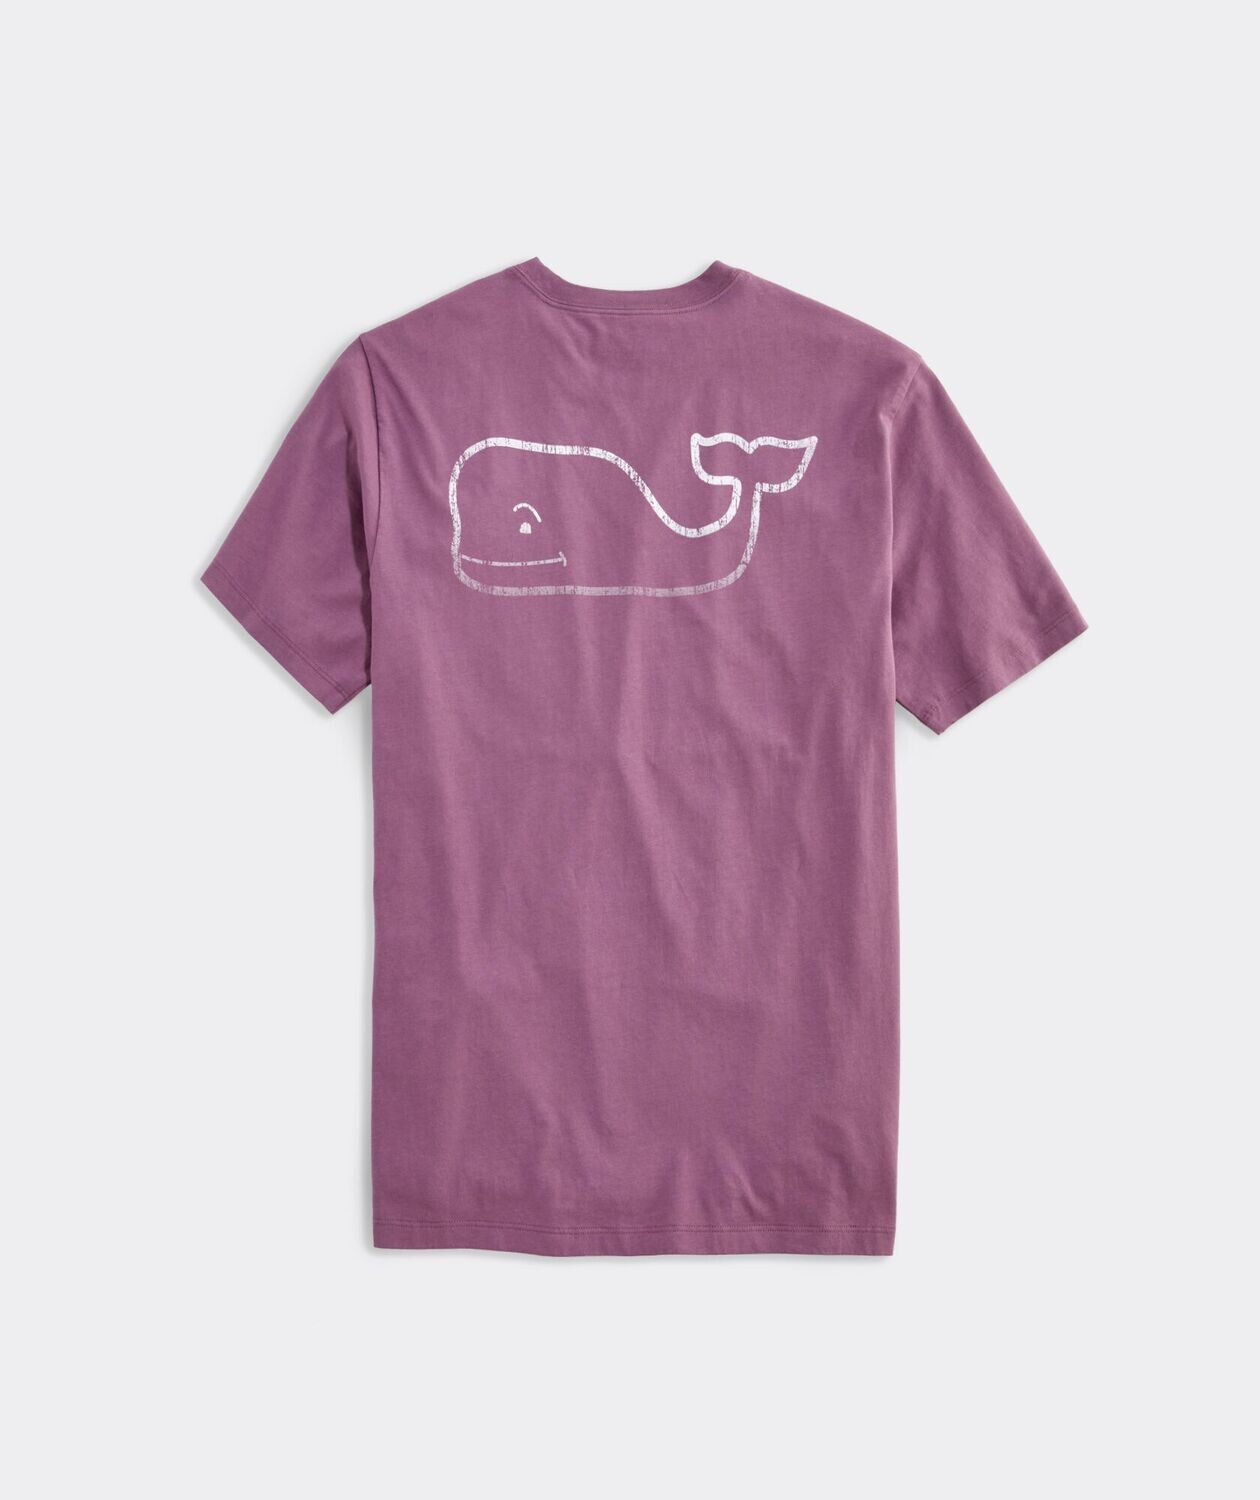 Vineyard Vines M SS Faded Whale Tee WASHED PURPLE